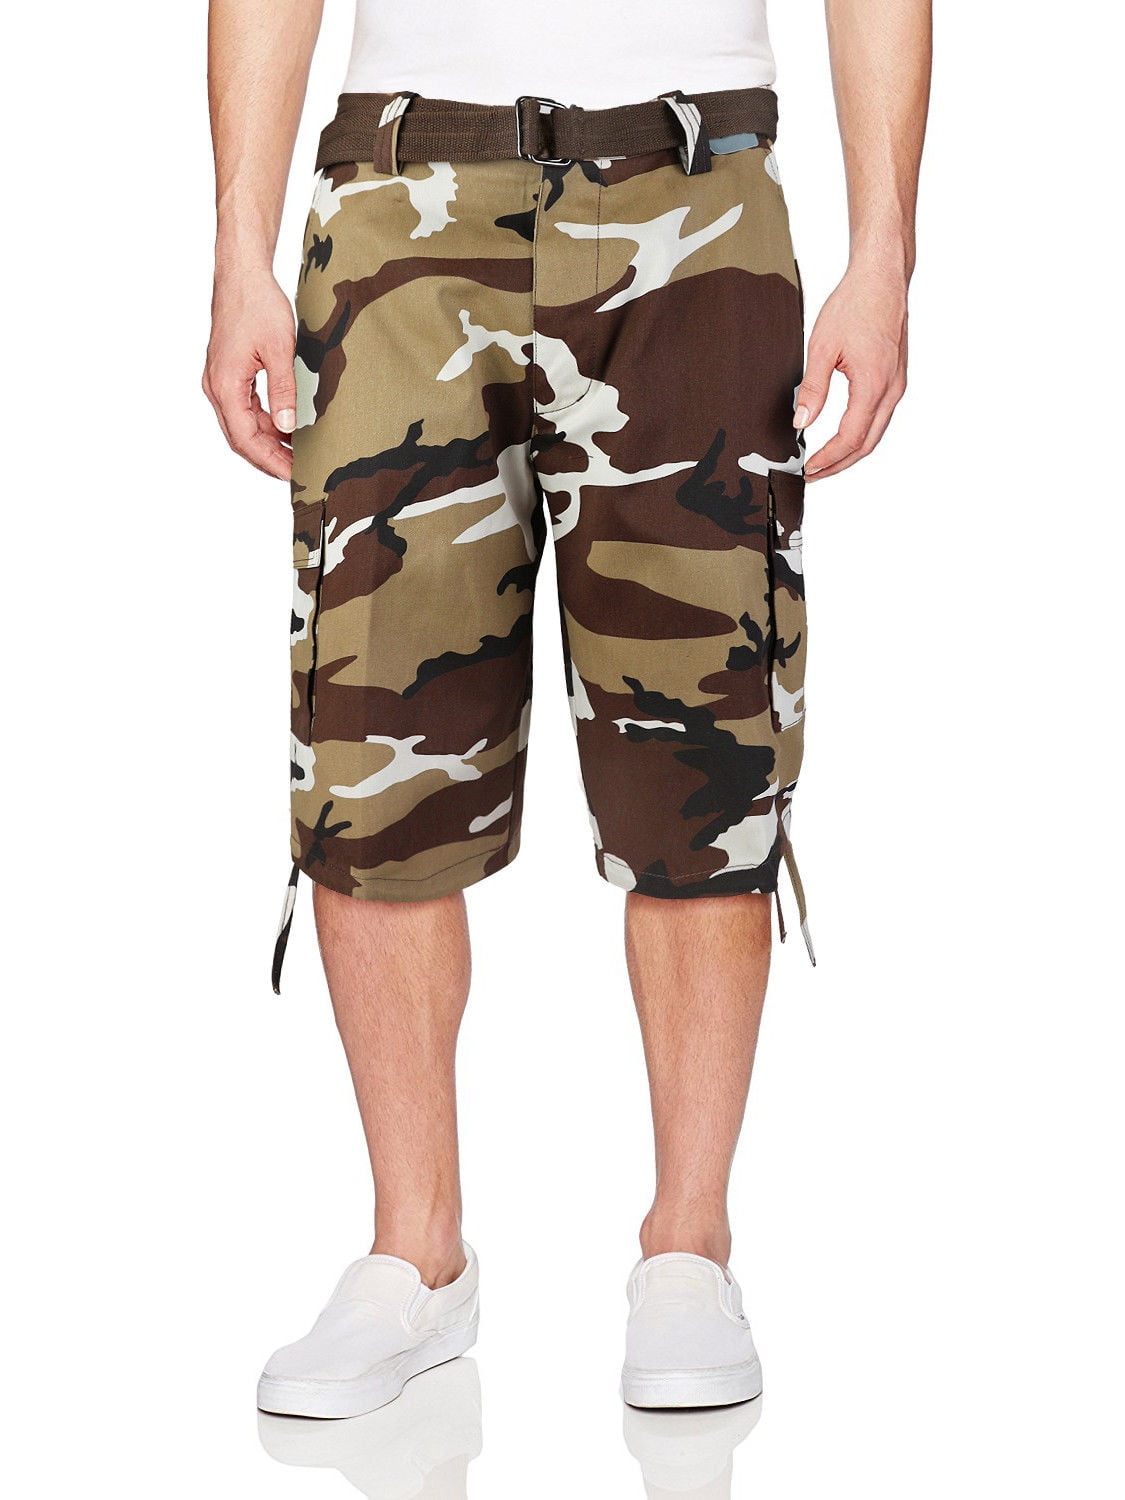 What To Wear With Army Camo Shorts For Men